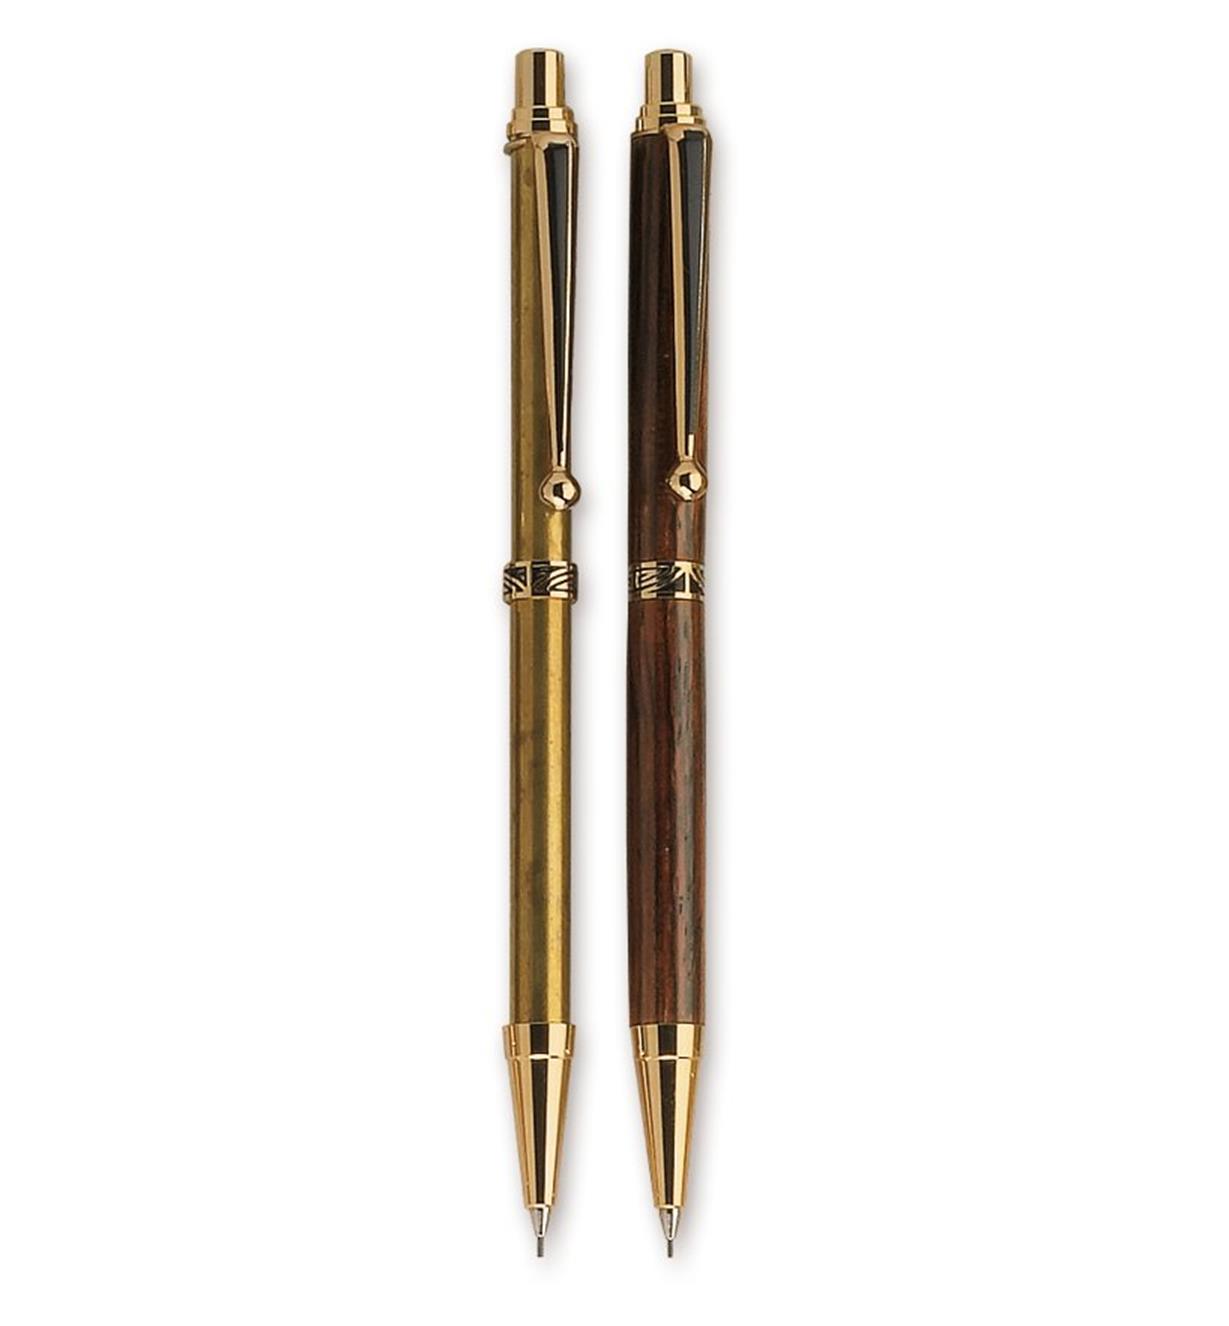 Example of completed Slim-Style Deco Pencil next to pencil hardware